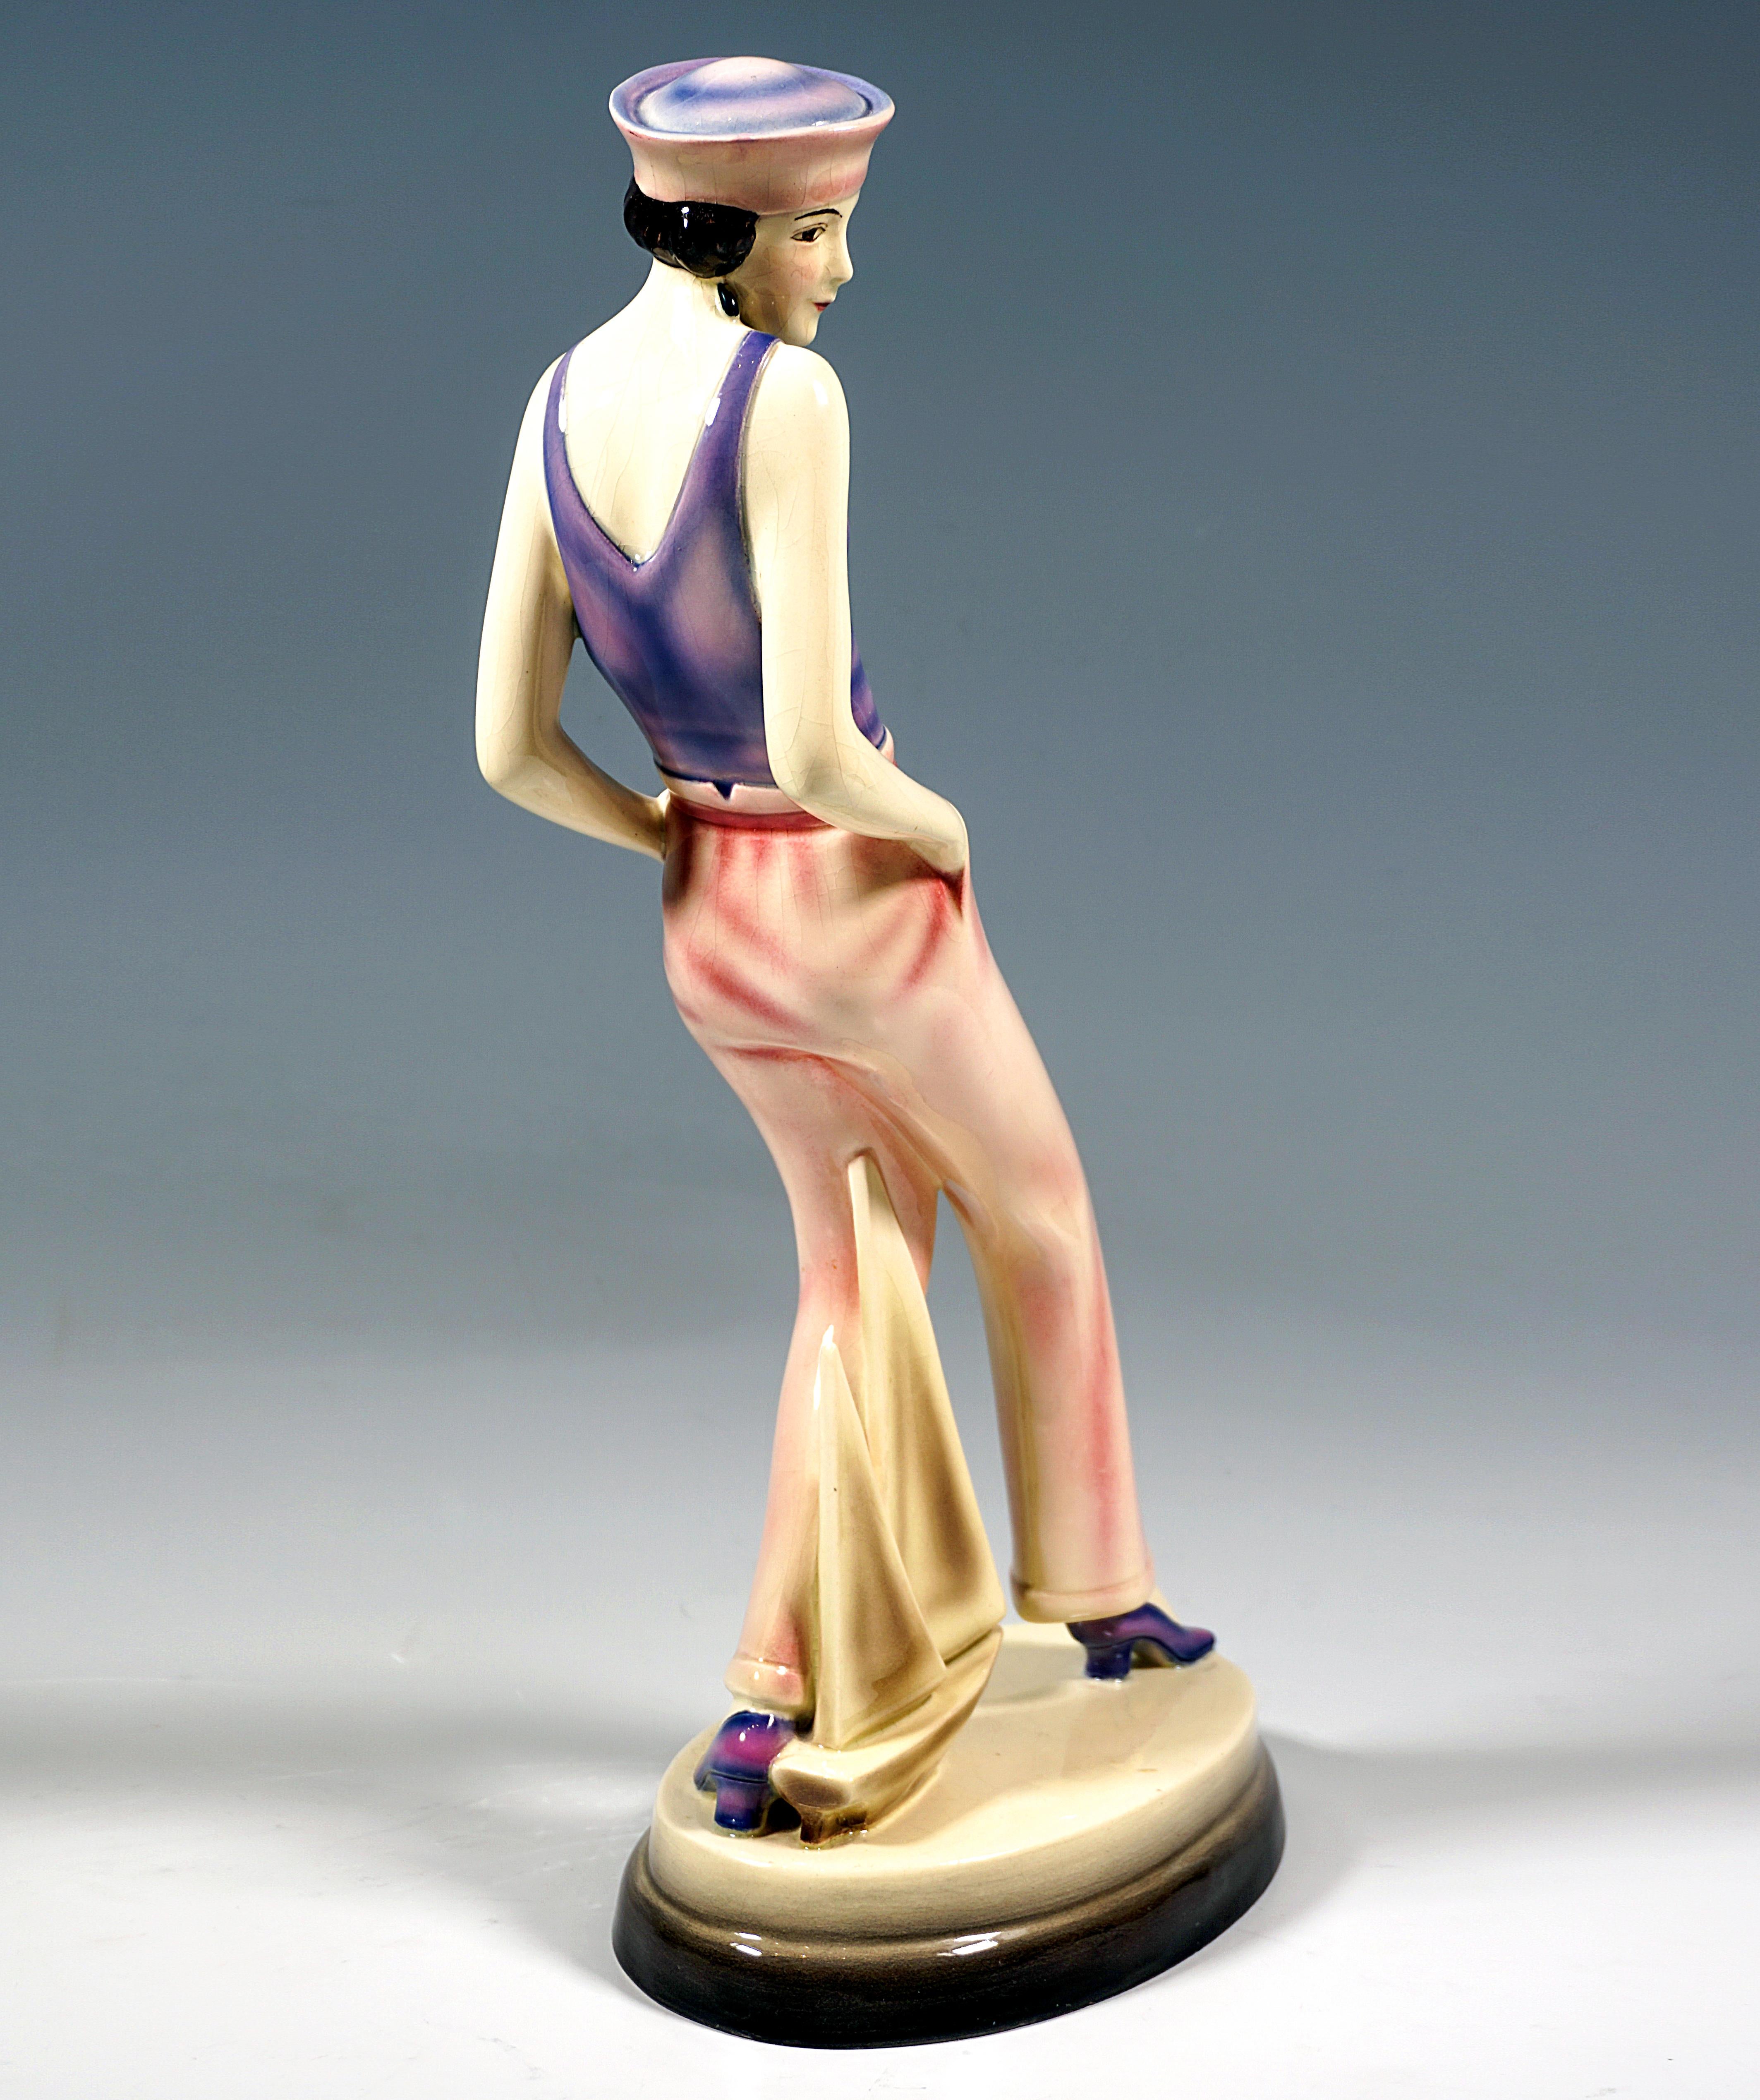 Very Rare Art Déco Goldscheider Ceramics Figurine around 1930:
Young dancer in a sleeveless top reminiscent of a bathing suit and wide trousers, a sailor hat on the short black curls, looking to the right and taking a step forward with her right